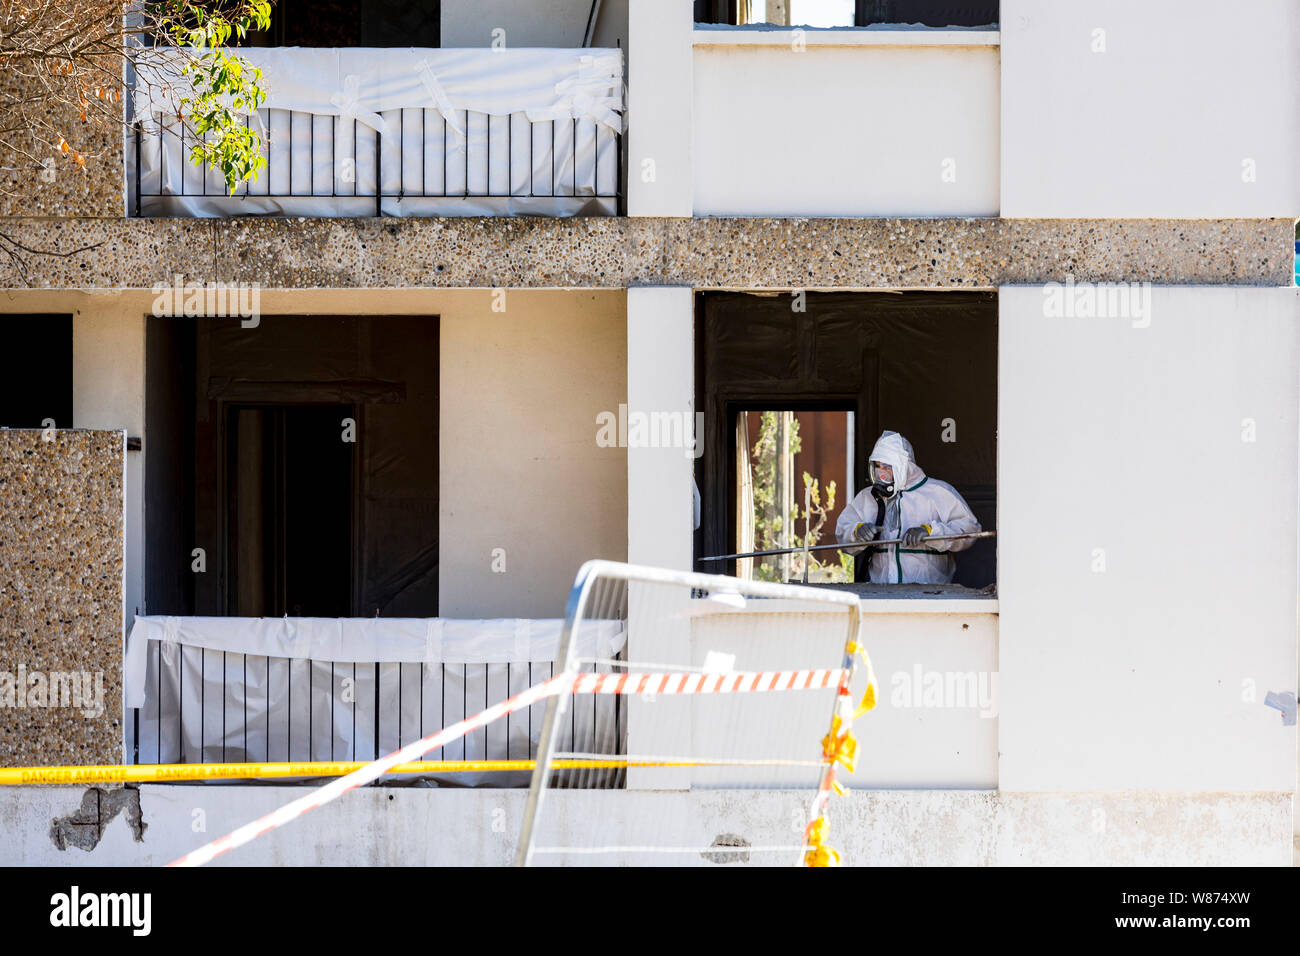 Montpellier (southern France): asbestos removal and demolition of an old building. Asbestos removal worker wearing a protective suit and mask. Stock Photo